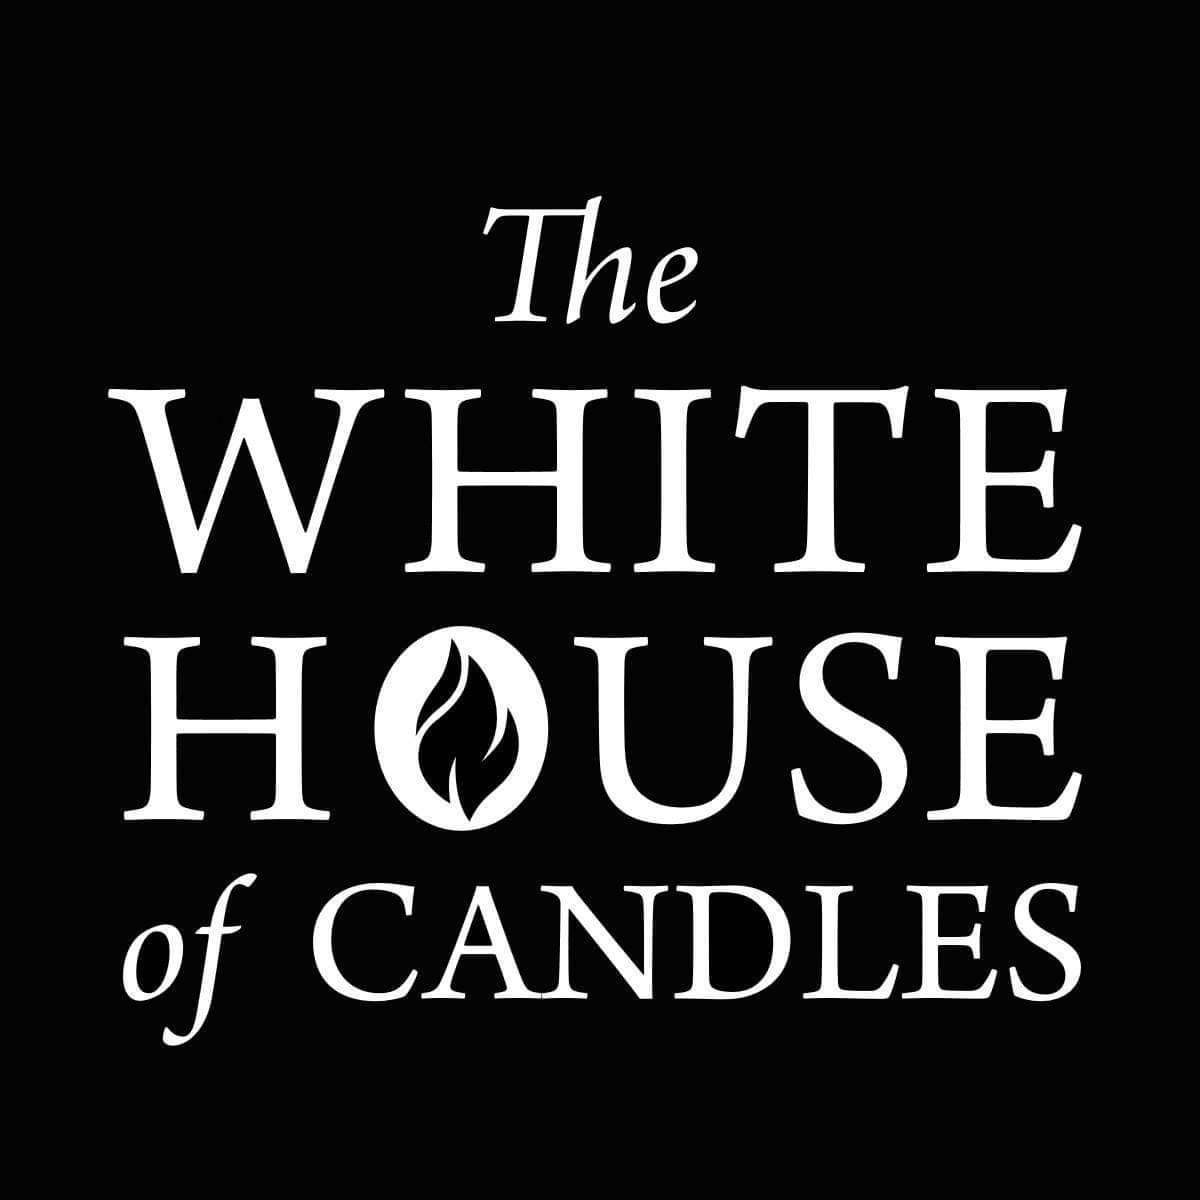 The White House of Candles